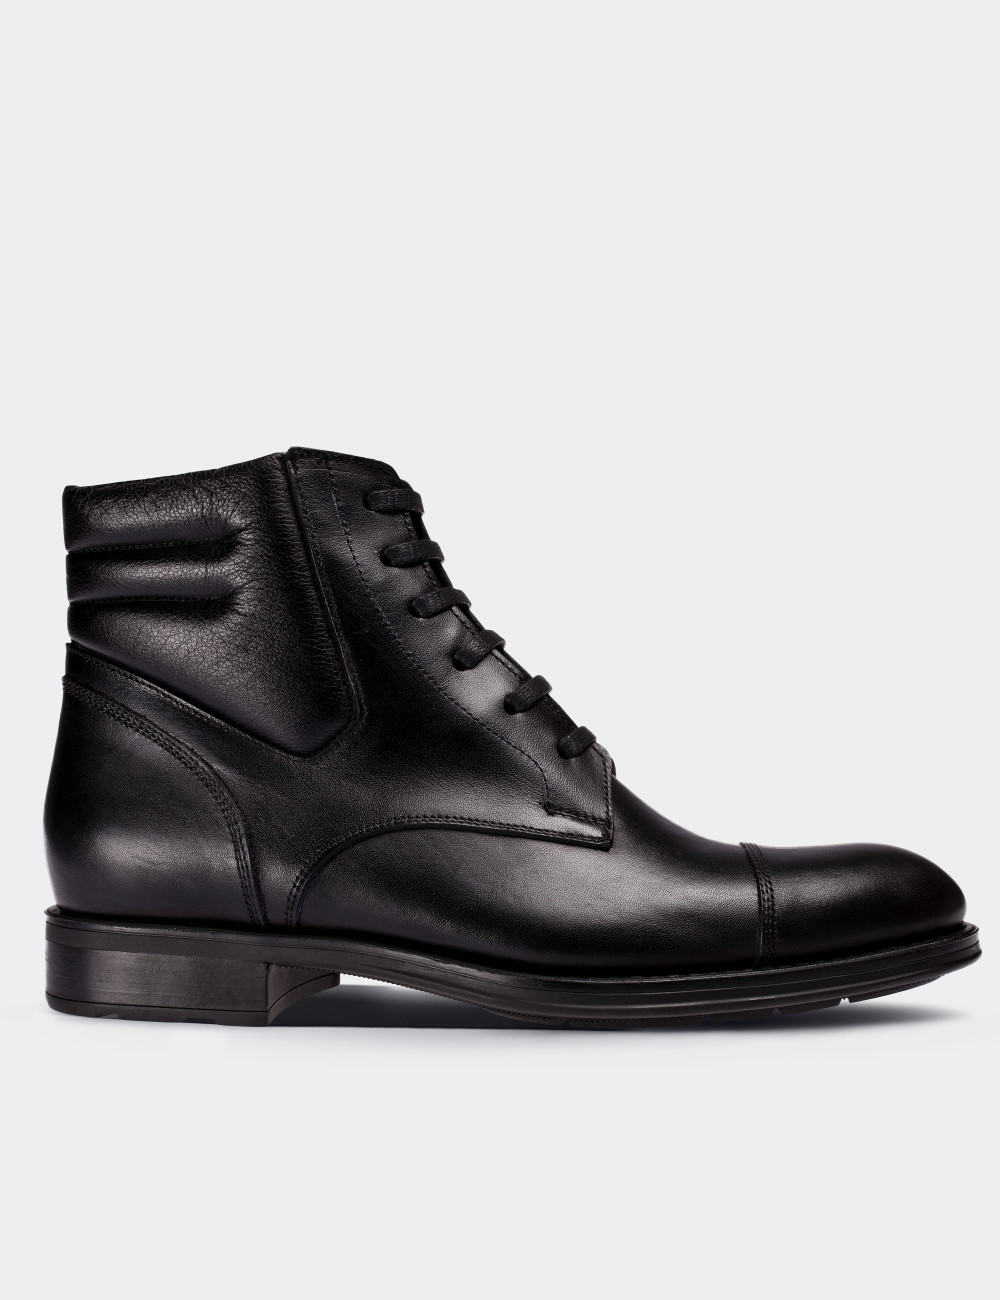 Black  Leather  Boots - 01752MSYHC01